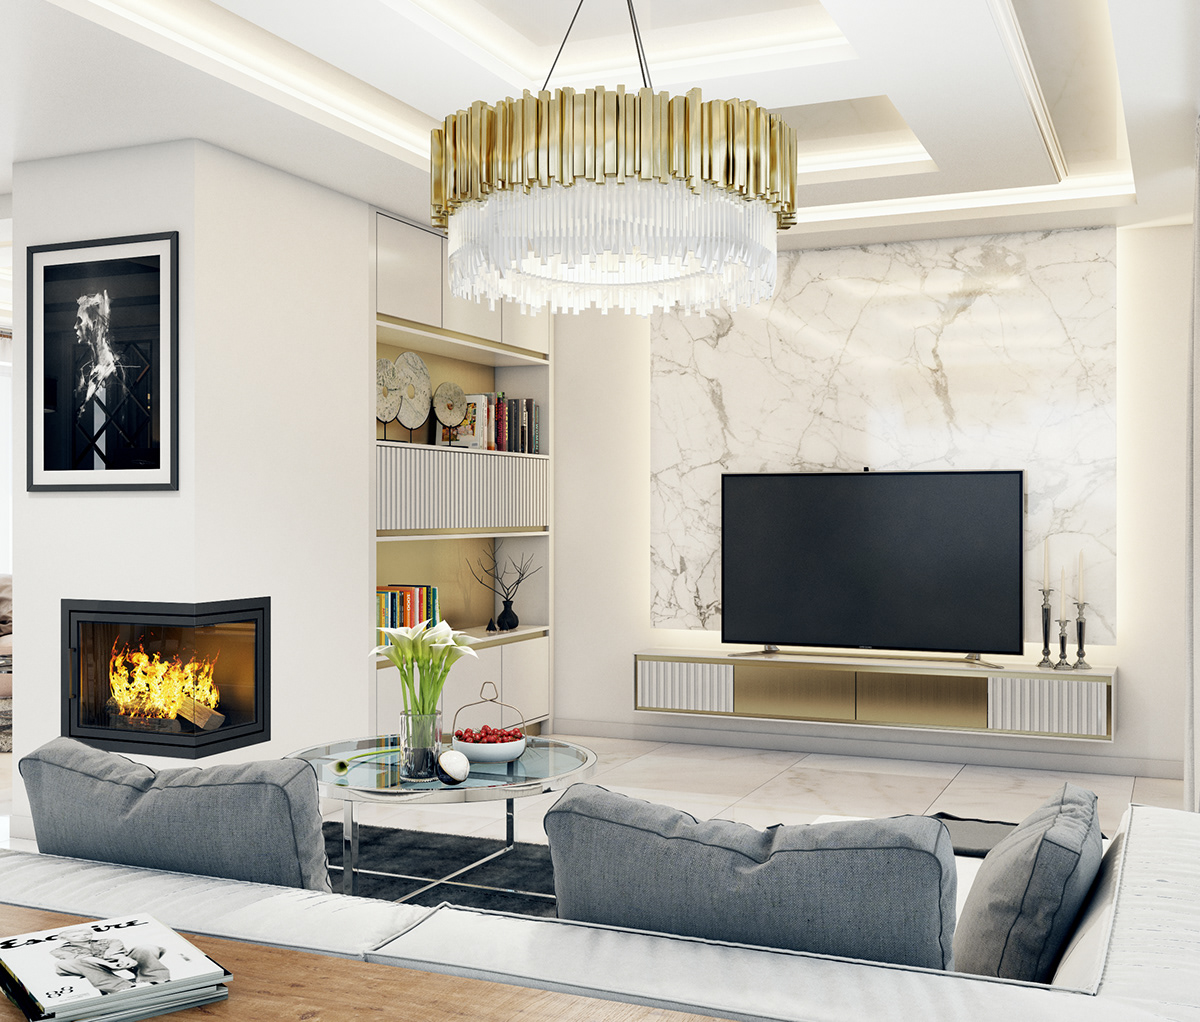 visualization design Interior living room bar dining fireplace Style modern architecture